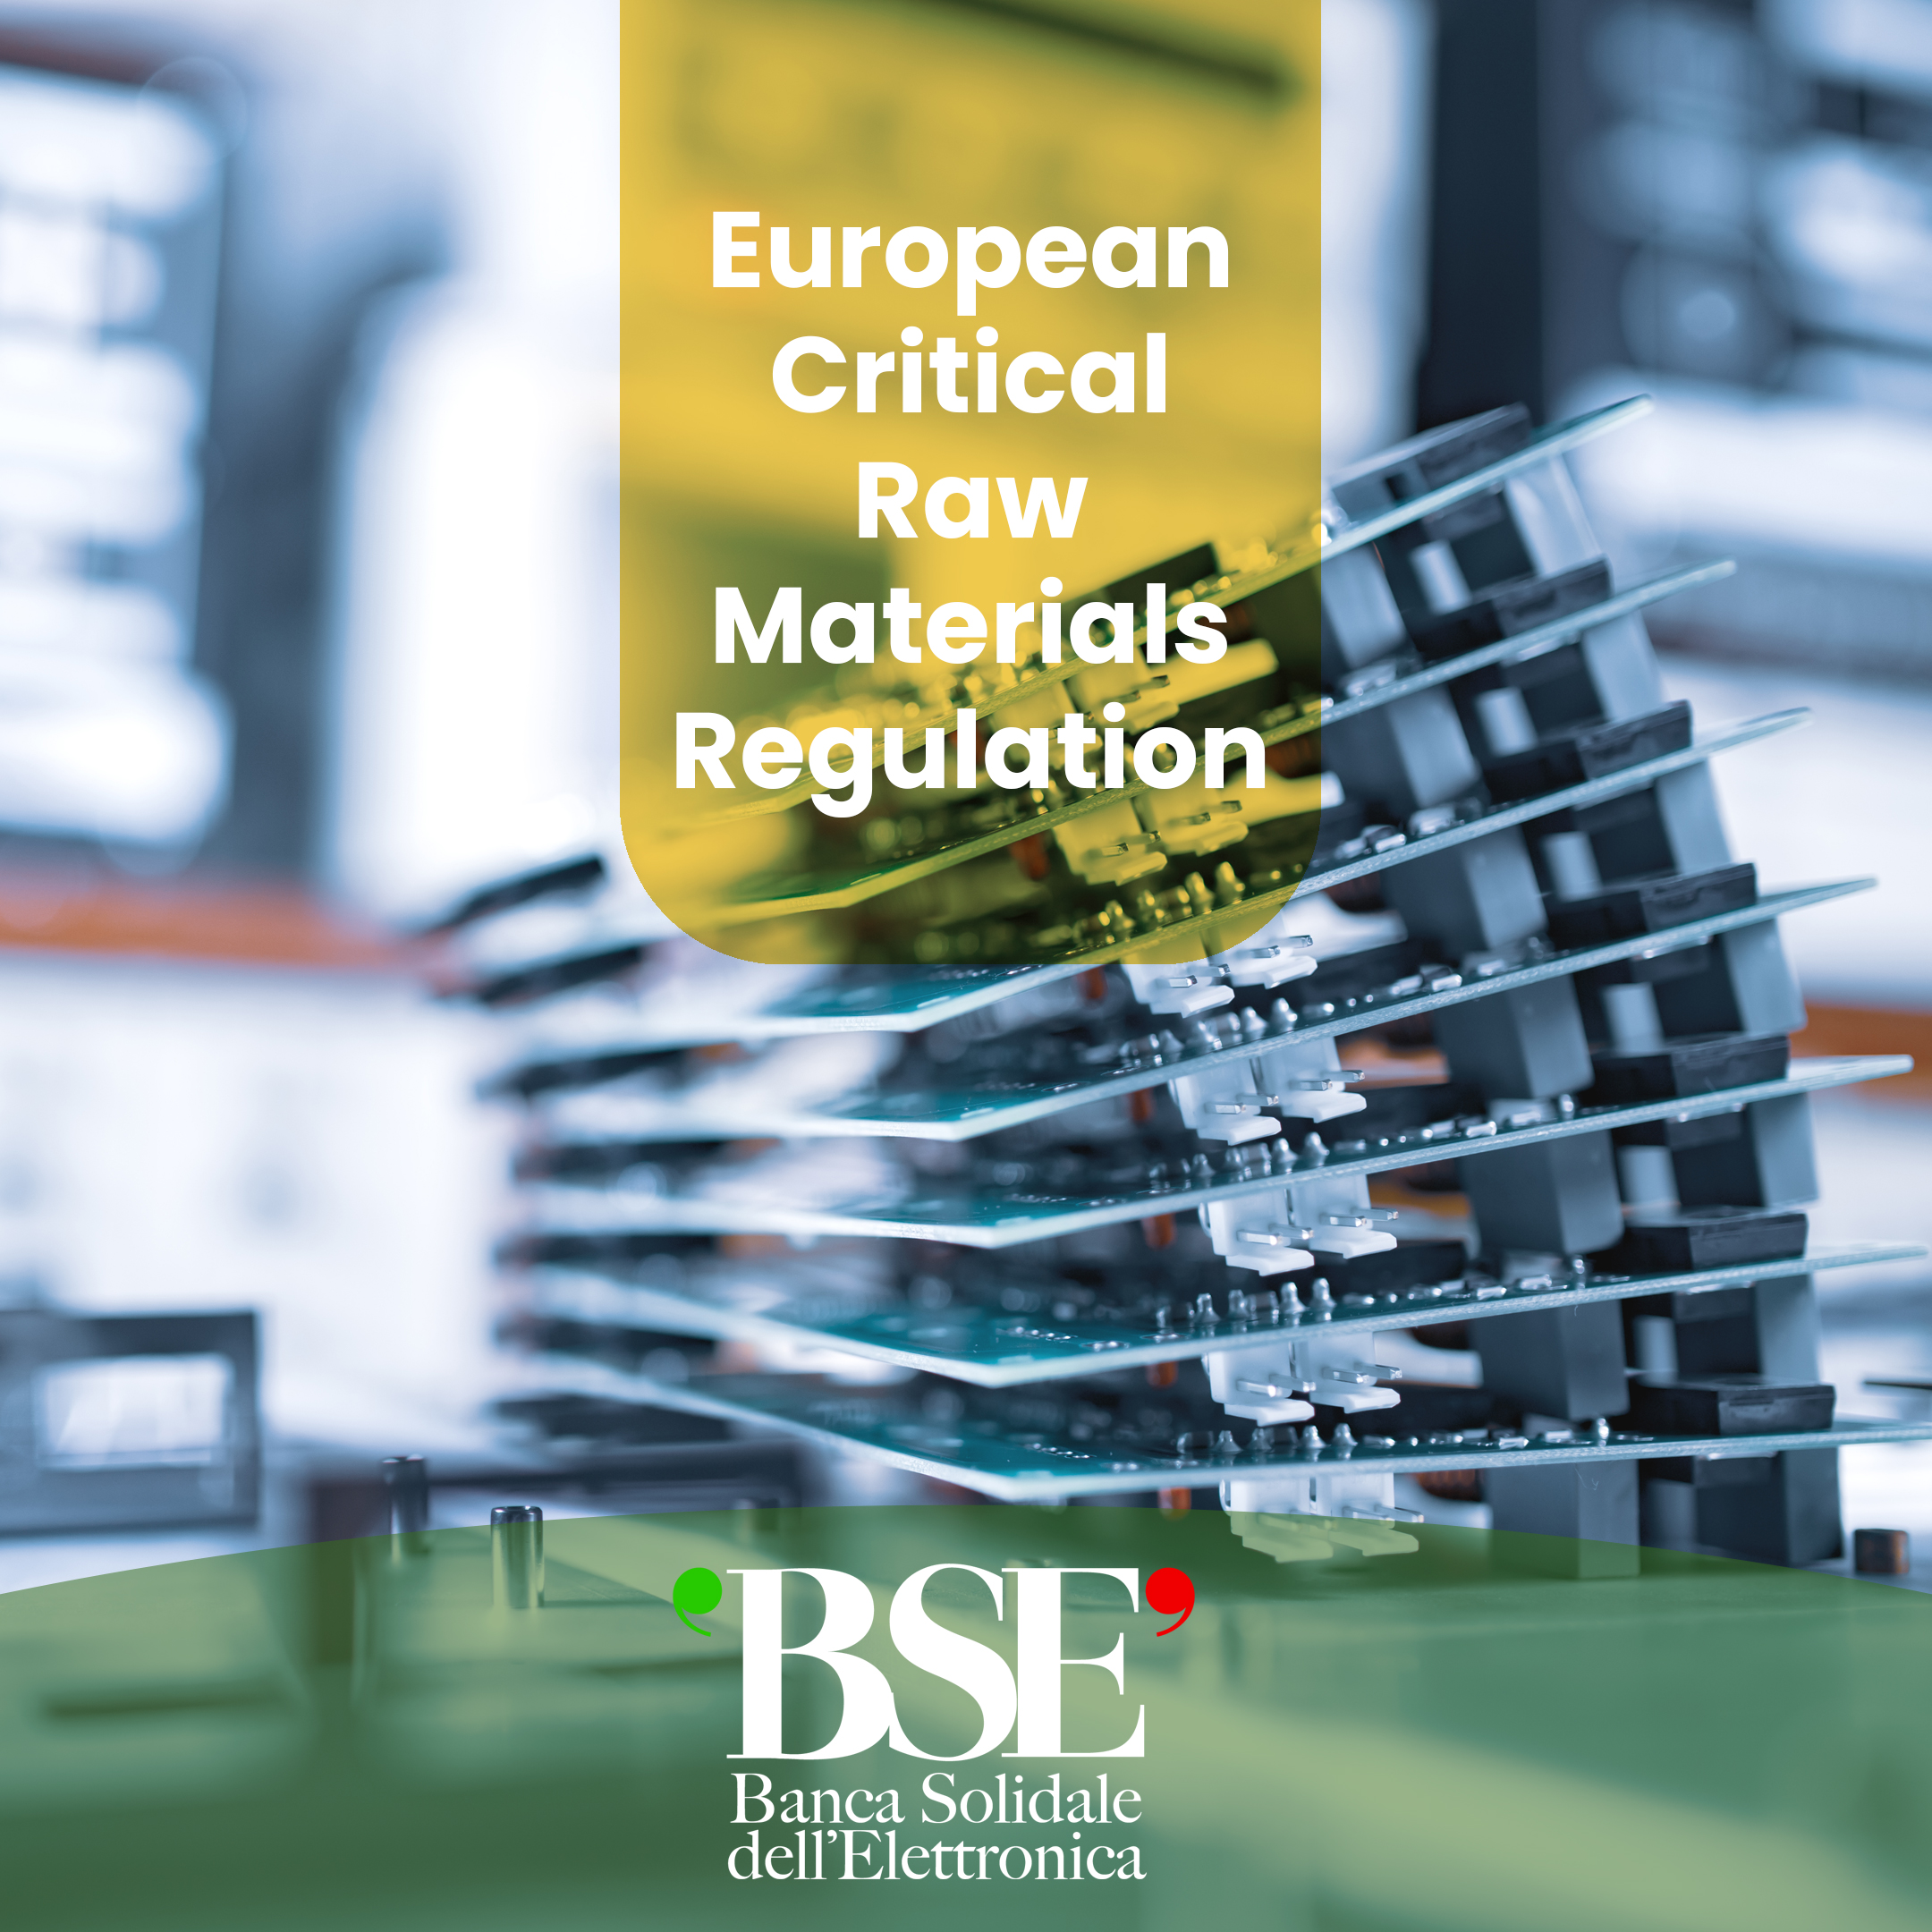 European Critical Raw Materials Regulation: Opportunities & Challenges for Stakeholders